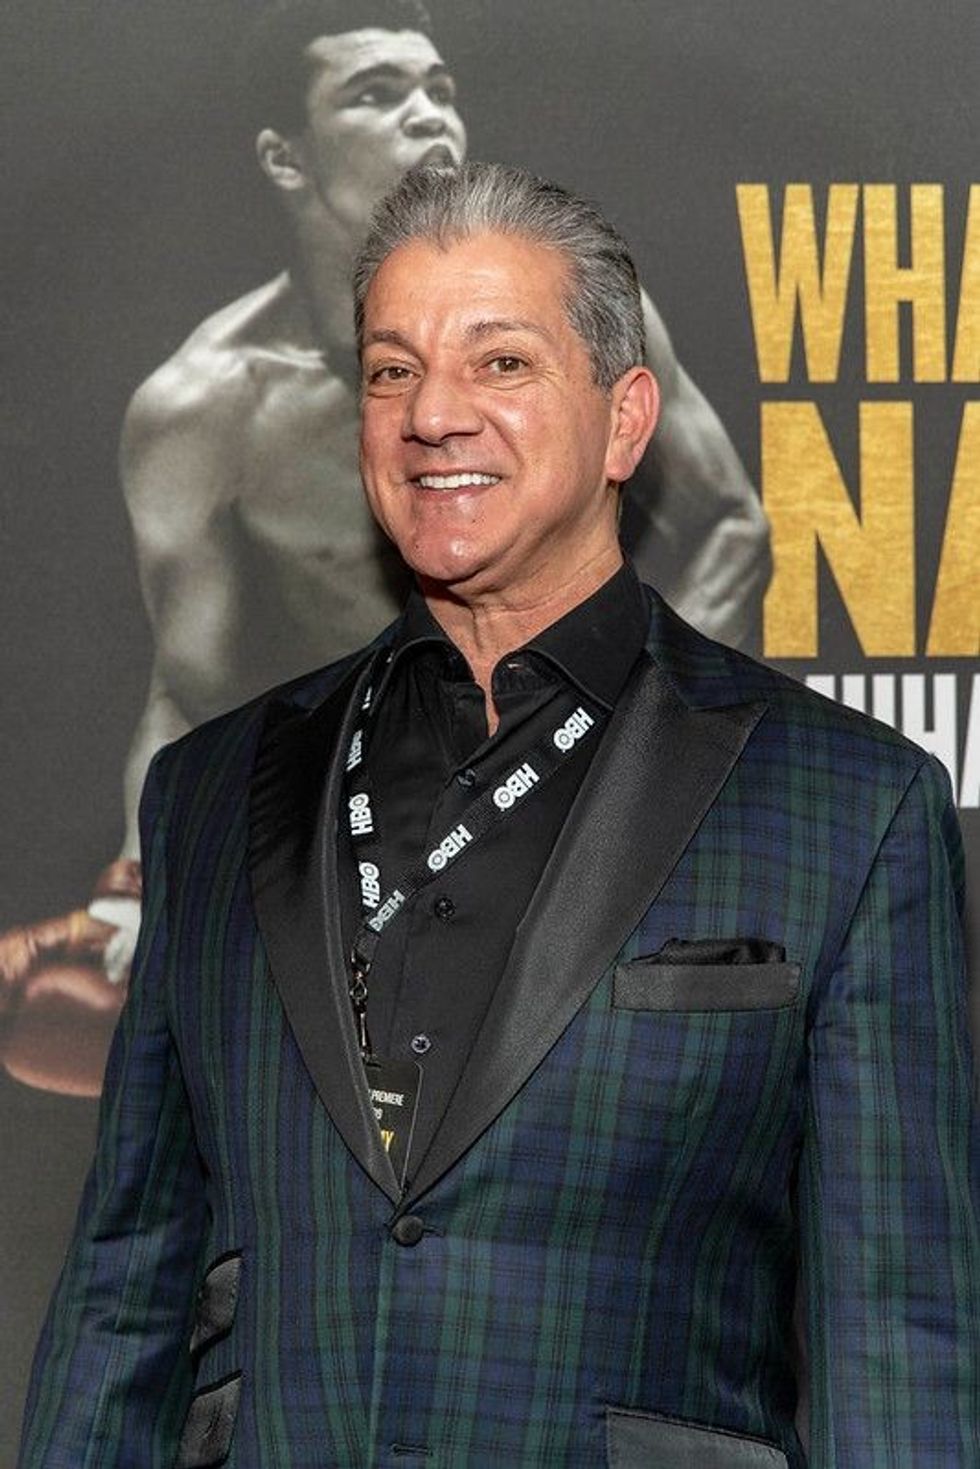 Find out all about the well-known UFC announcer Bruce Anthony Buffer, commonly known as Bruce Buffer.